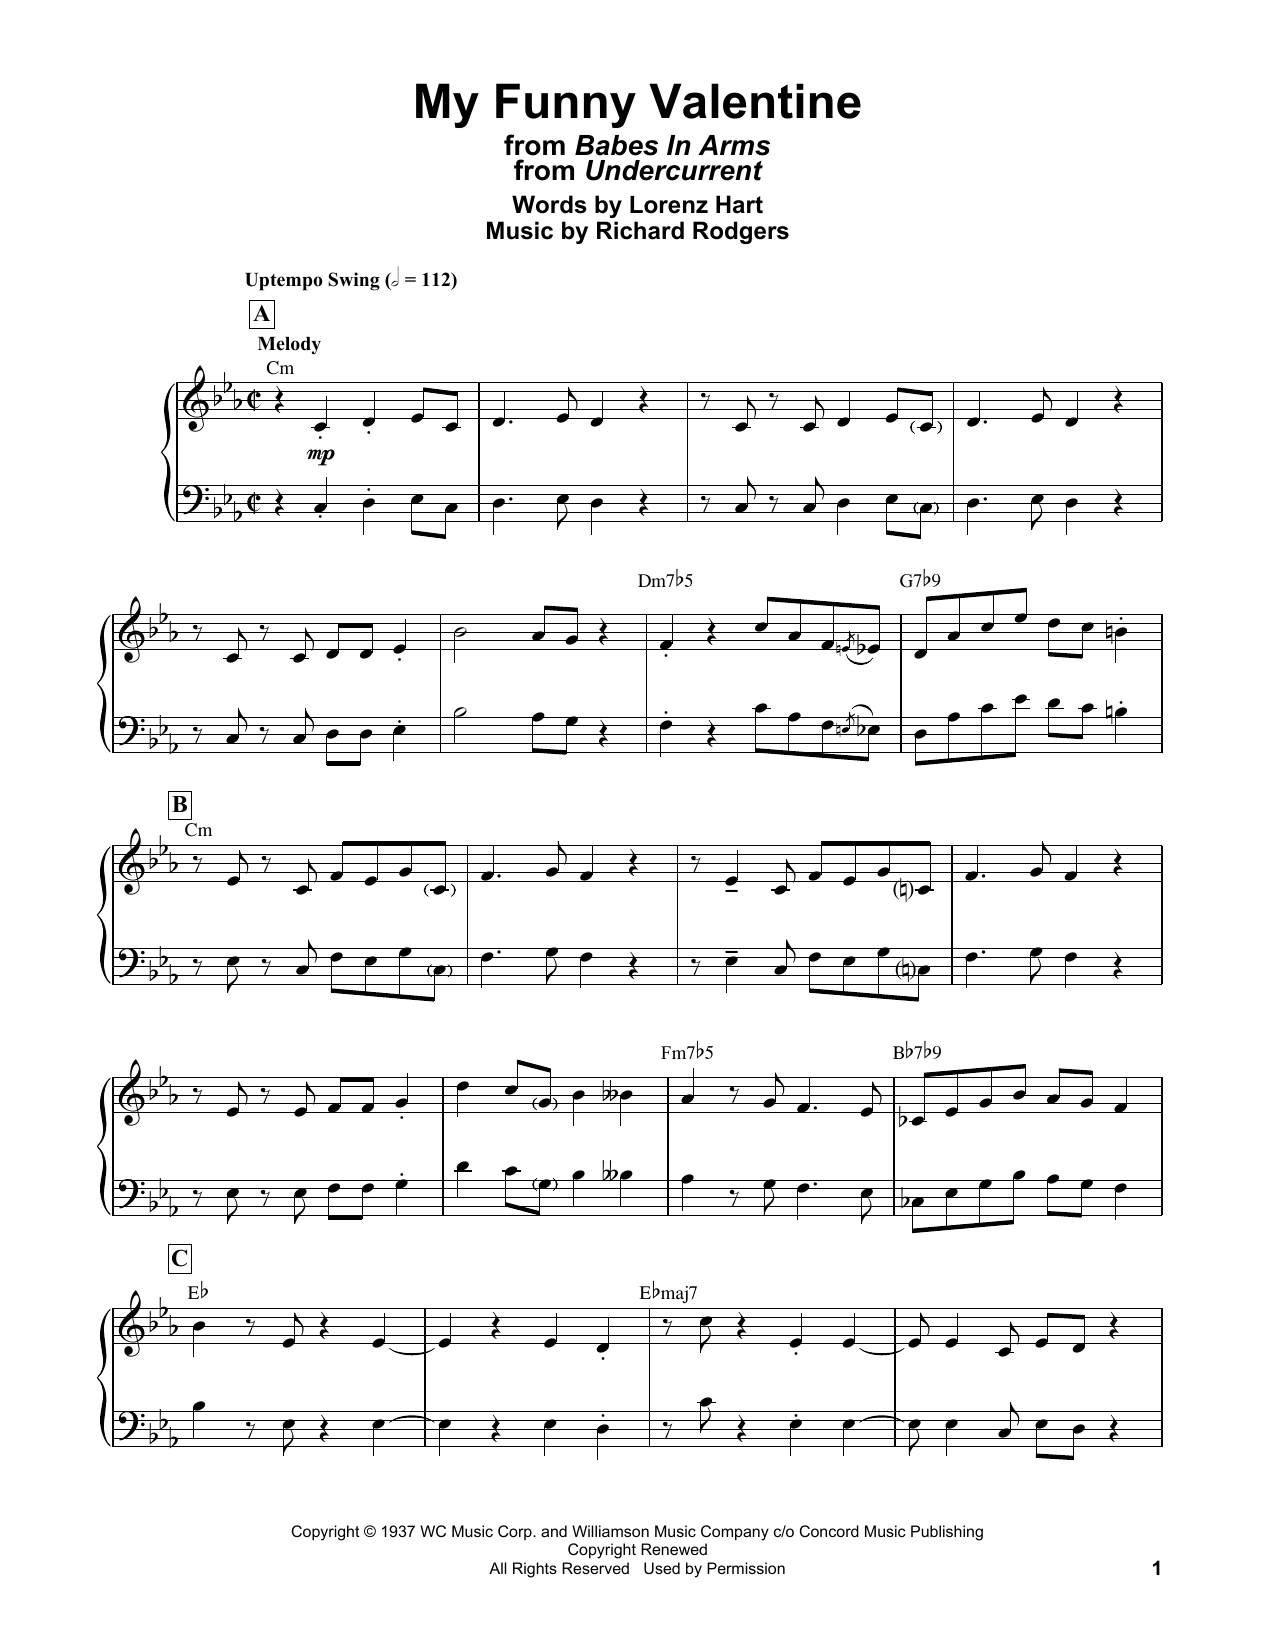 Bill Evans My Funny Valentine (from Babes In Arms) Sheet Music Notes,  Chords  Download Printable Piano Solo PDF Score - SKU: 9